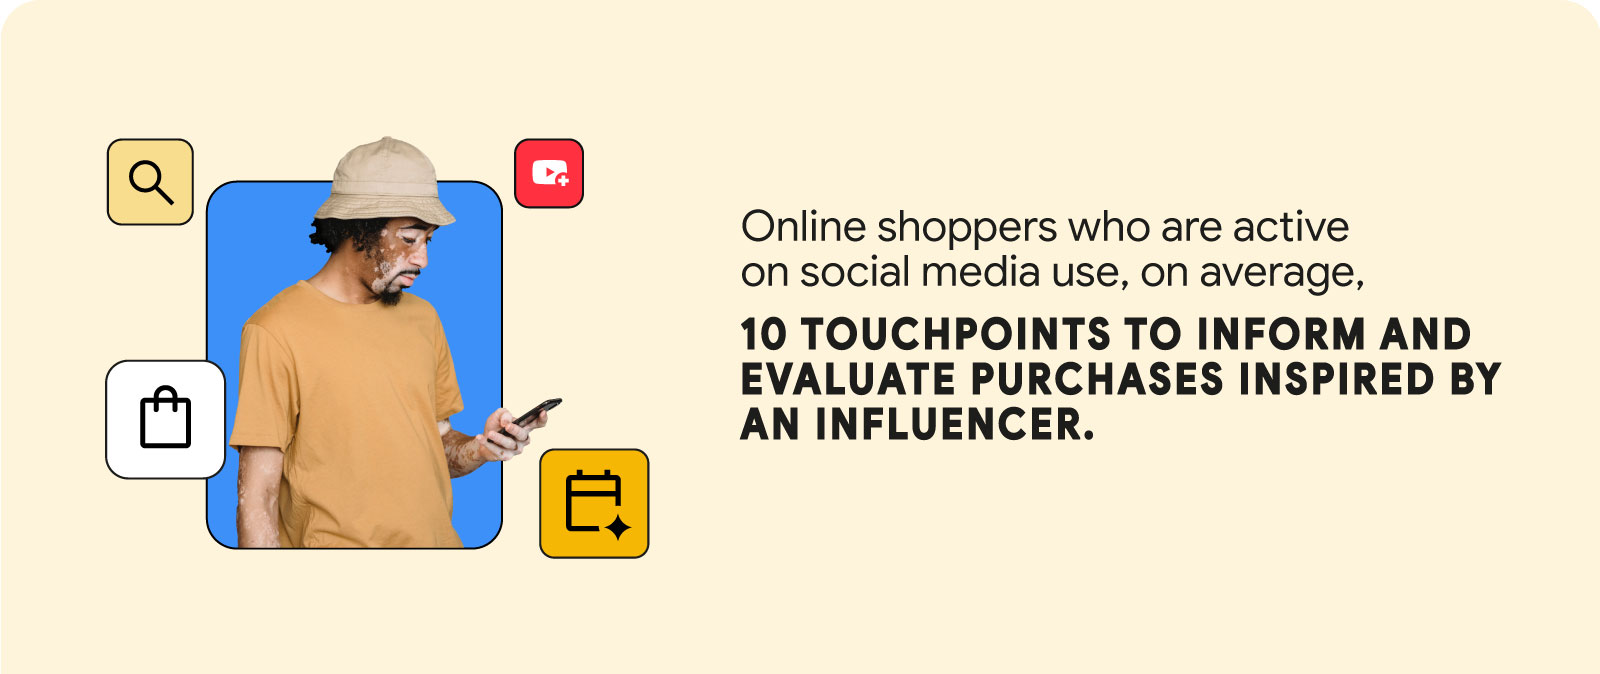 A man with vitiligo, a goatee, and dark curly hair under a bucket hat shops on his phone next to text that reads: Online shoppers who are active on social media use, on average, 10 touchpoints to inform and evaluate purchases inspired by an influencer.